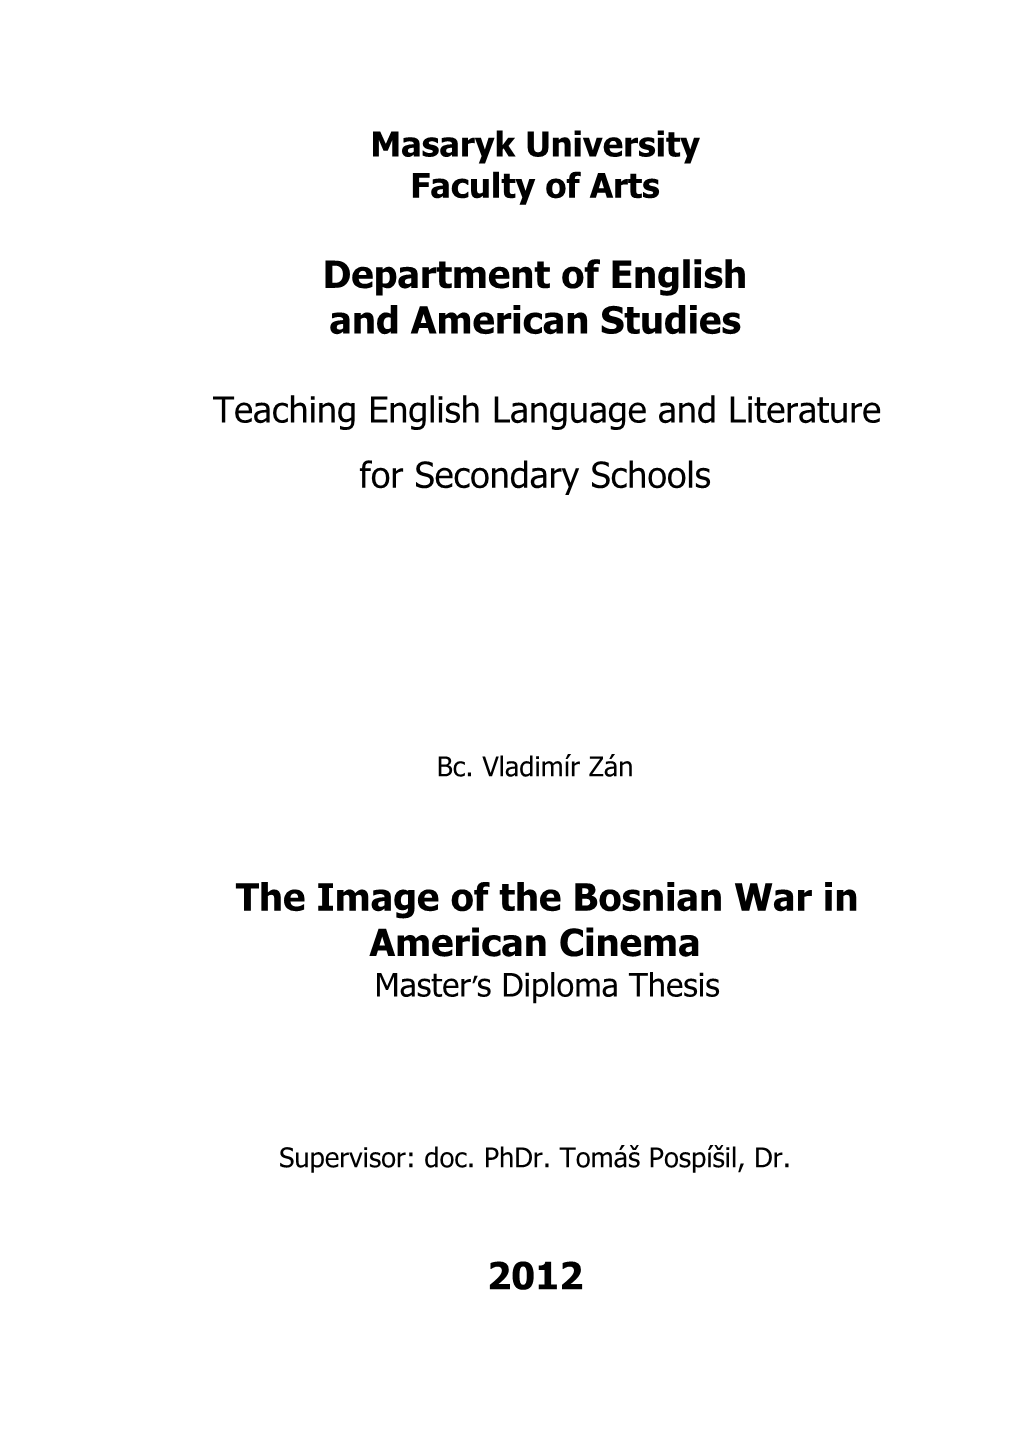 Department of English and American Studies the Image of the Bosnian